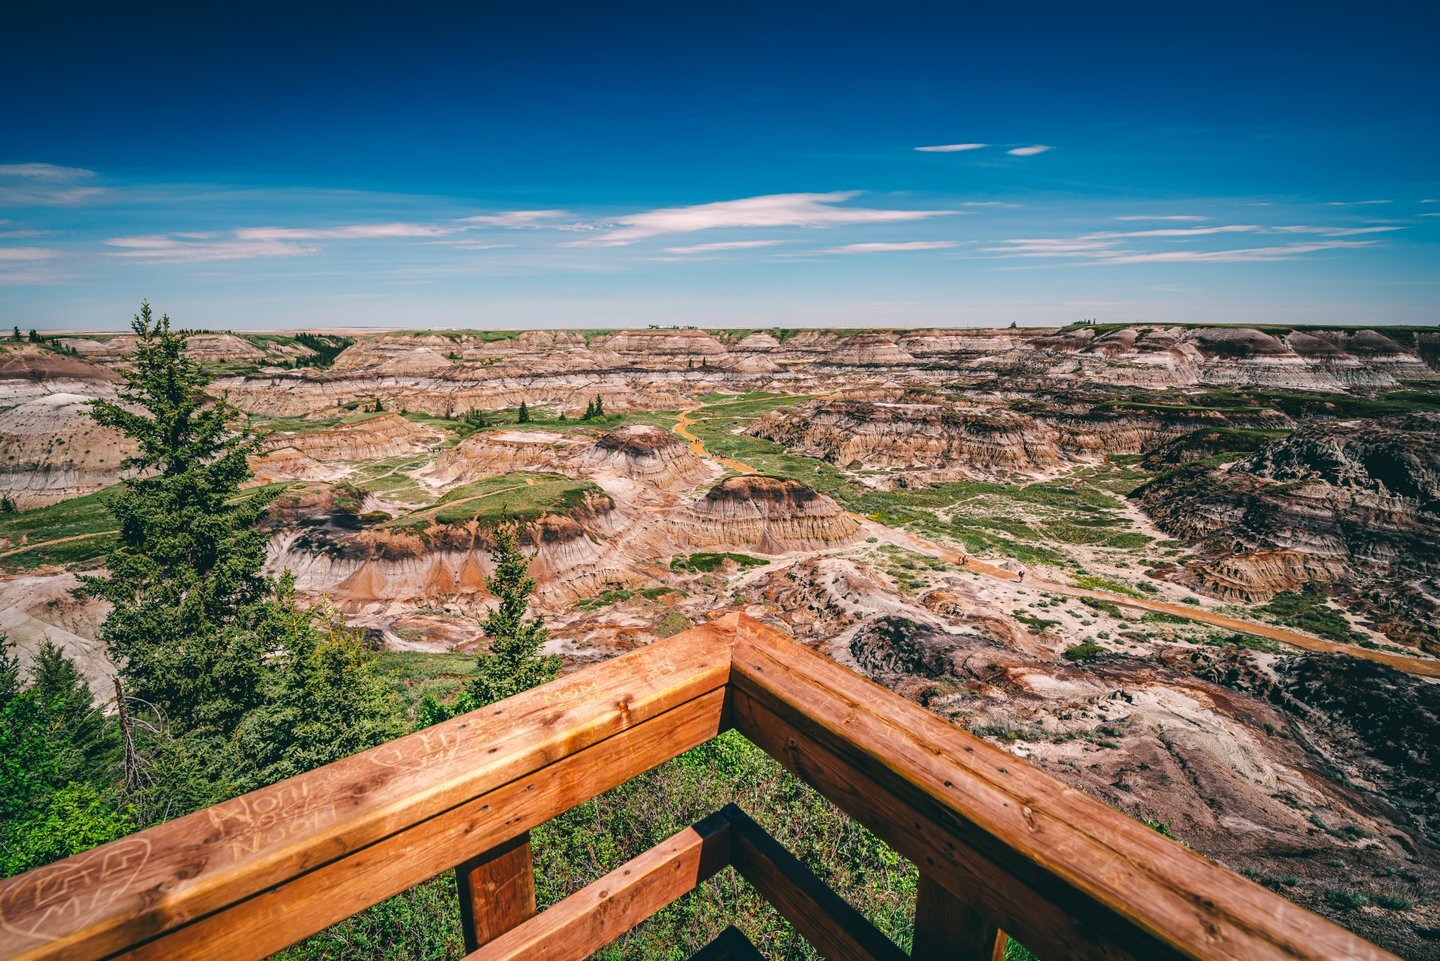 &ldquo;The Earth has Music for those who Listen&rdquo; 
- William Shakespeare

Happy Earth Day 🌎

Today, take time to truly enjoy the beauty wherever you are exploring. The Drumheller Valley is a great place to rediscover anytime of the year! 

📍Ho